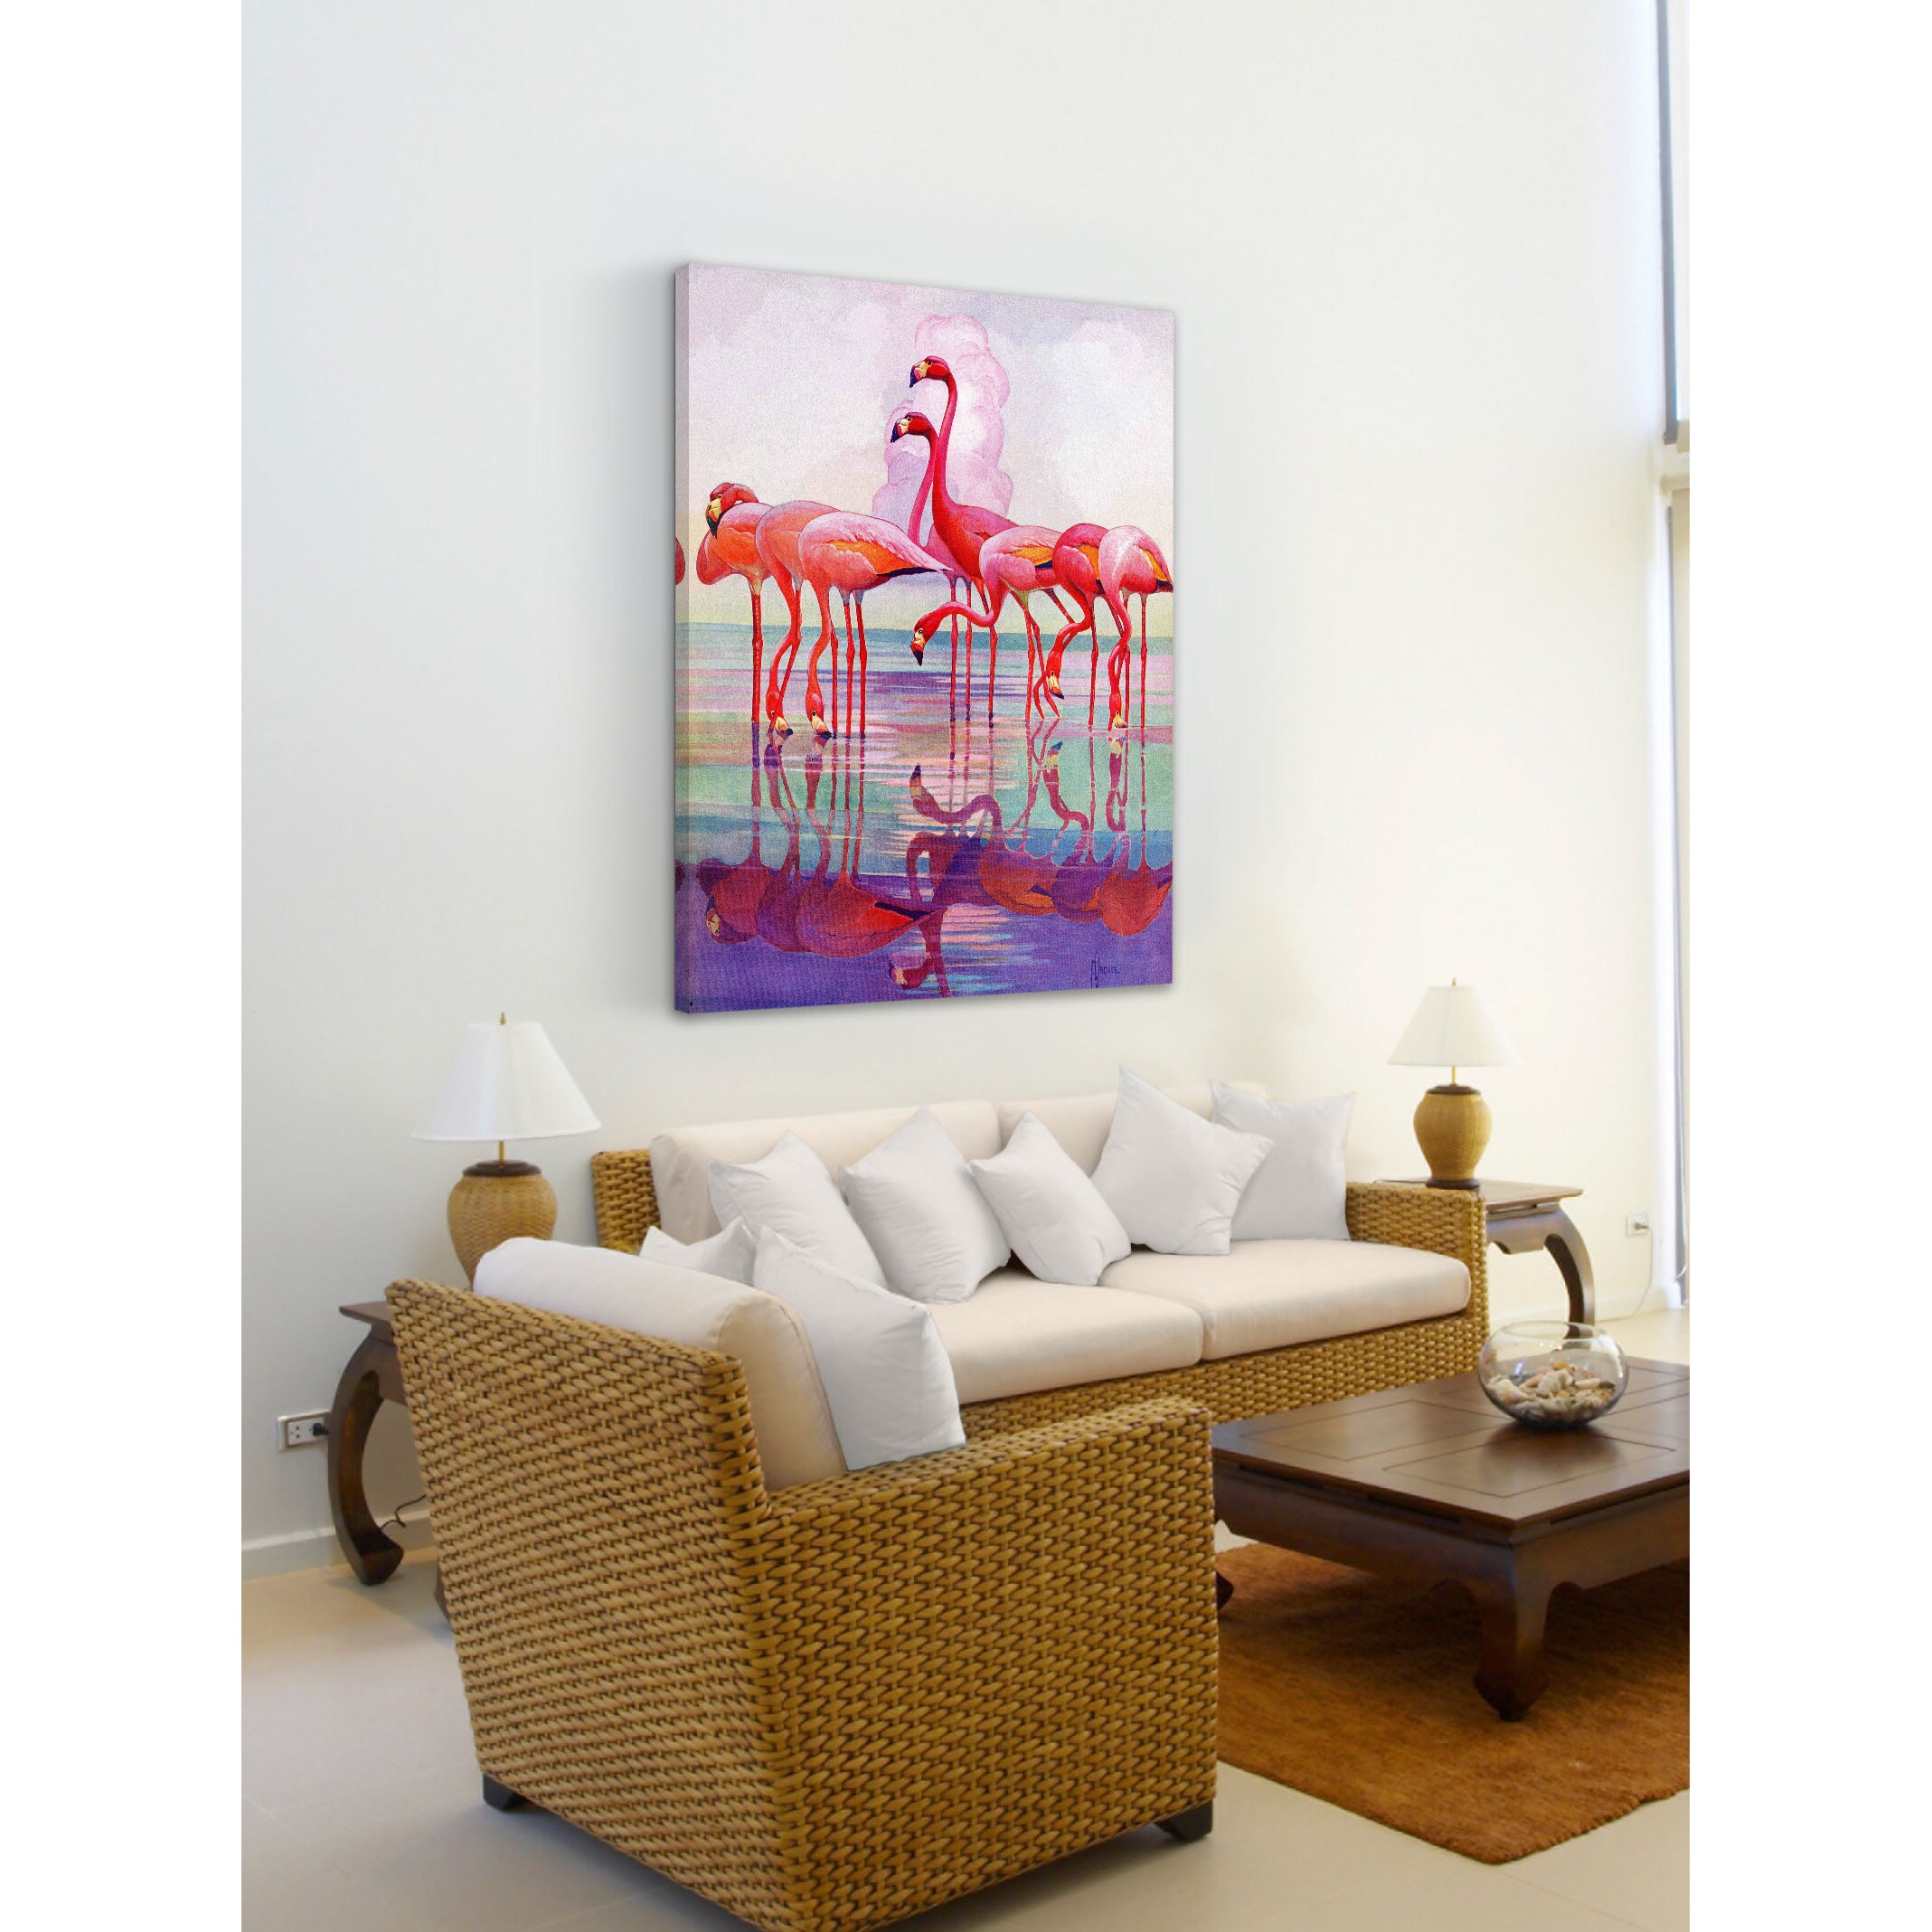 https://ak1.ostkcdn.com/images/products/10585972/Marmont-Hill-Pink-Flamingos-by-Francis-Lee-Jaques-Painting-Print-on-Canvas-ec29a958-edda-4f8d-a63c-3c3e9388ac73.jpg